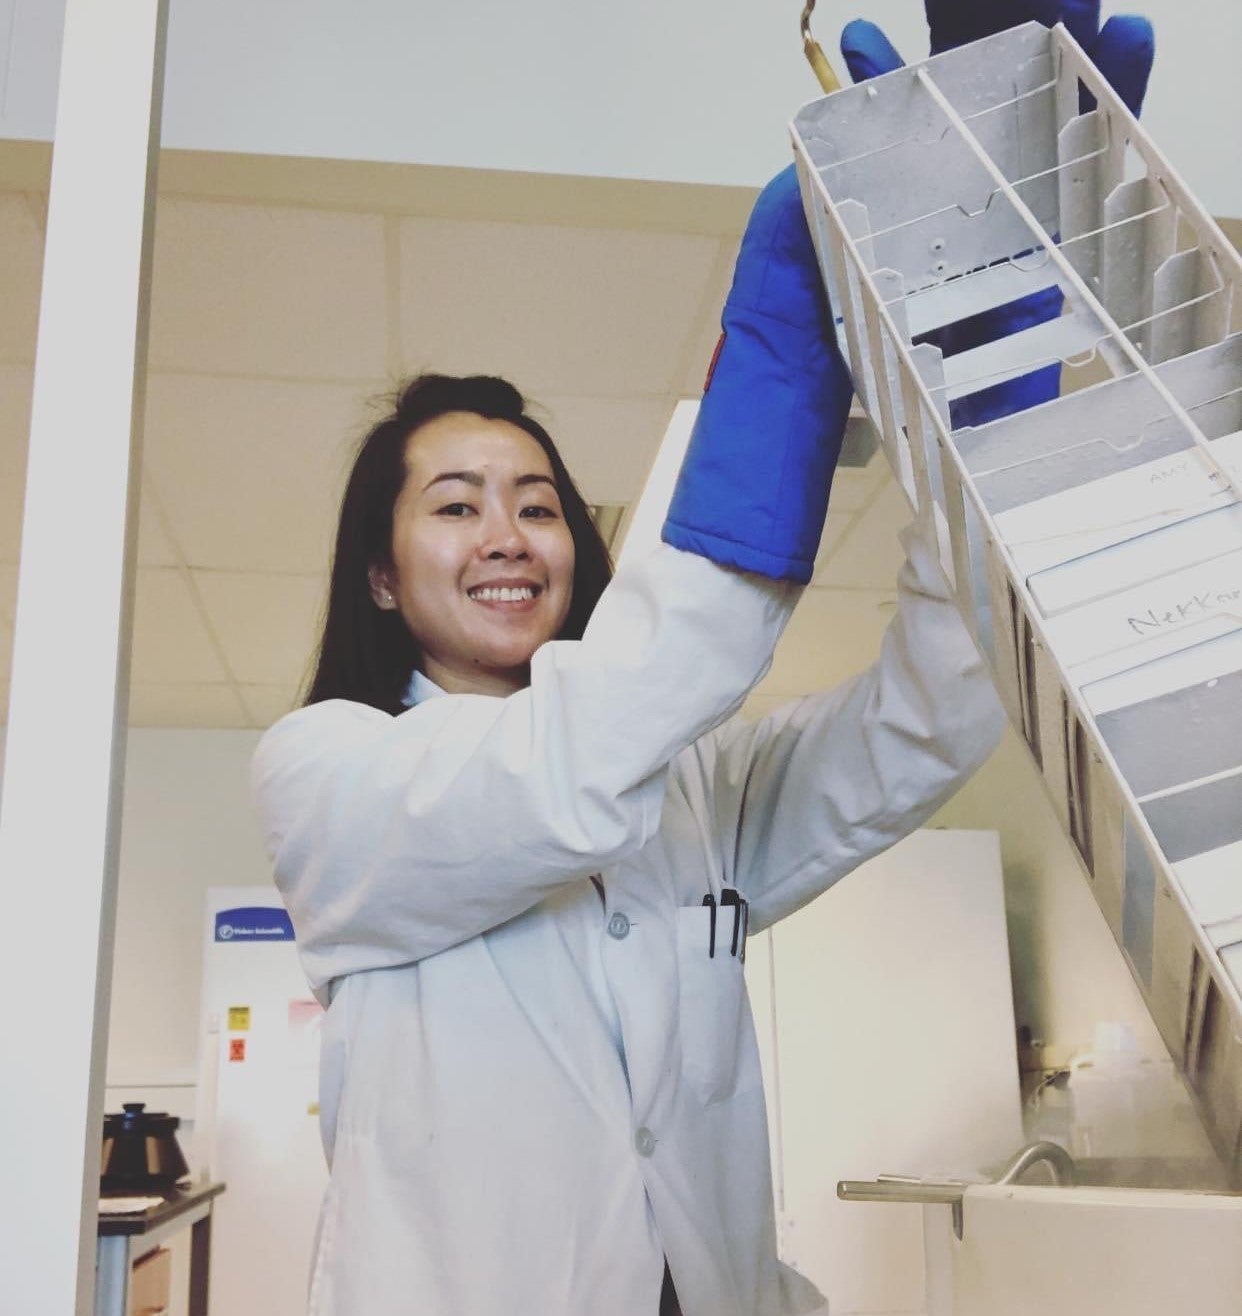 Amy Pham in the lab holding a piece of lab equipment